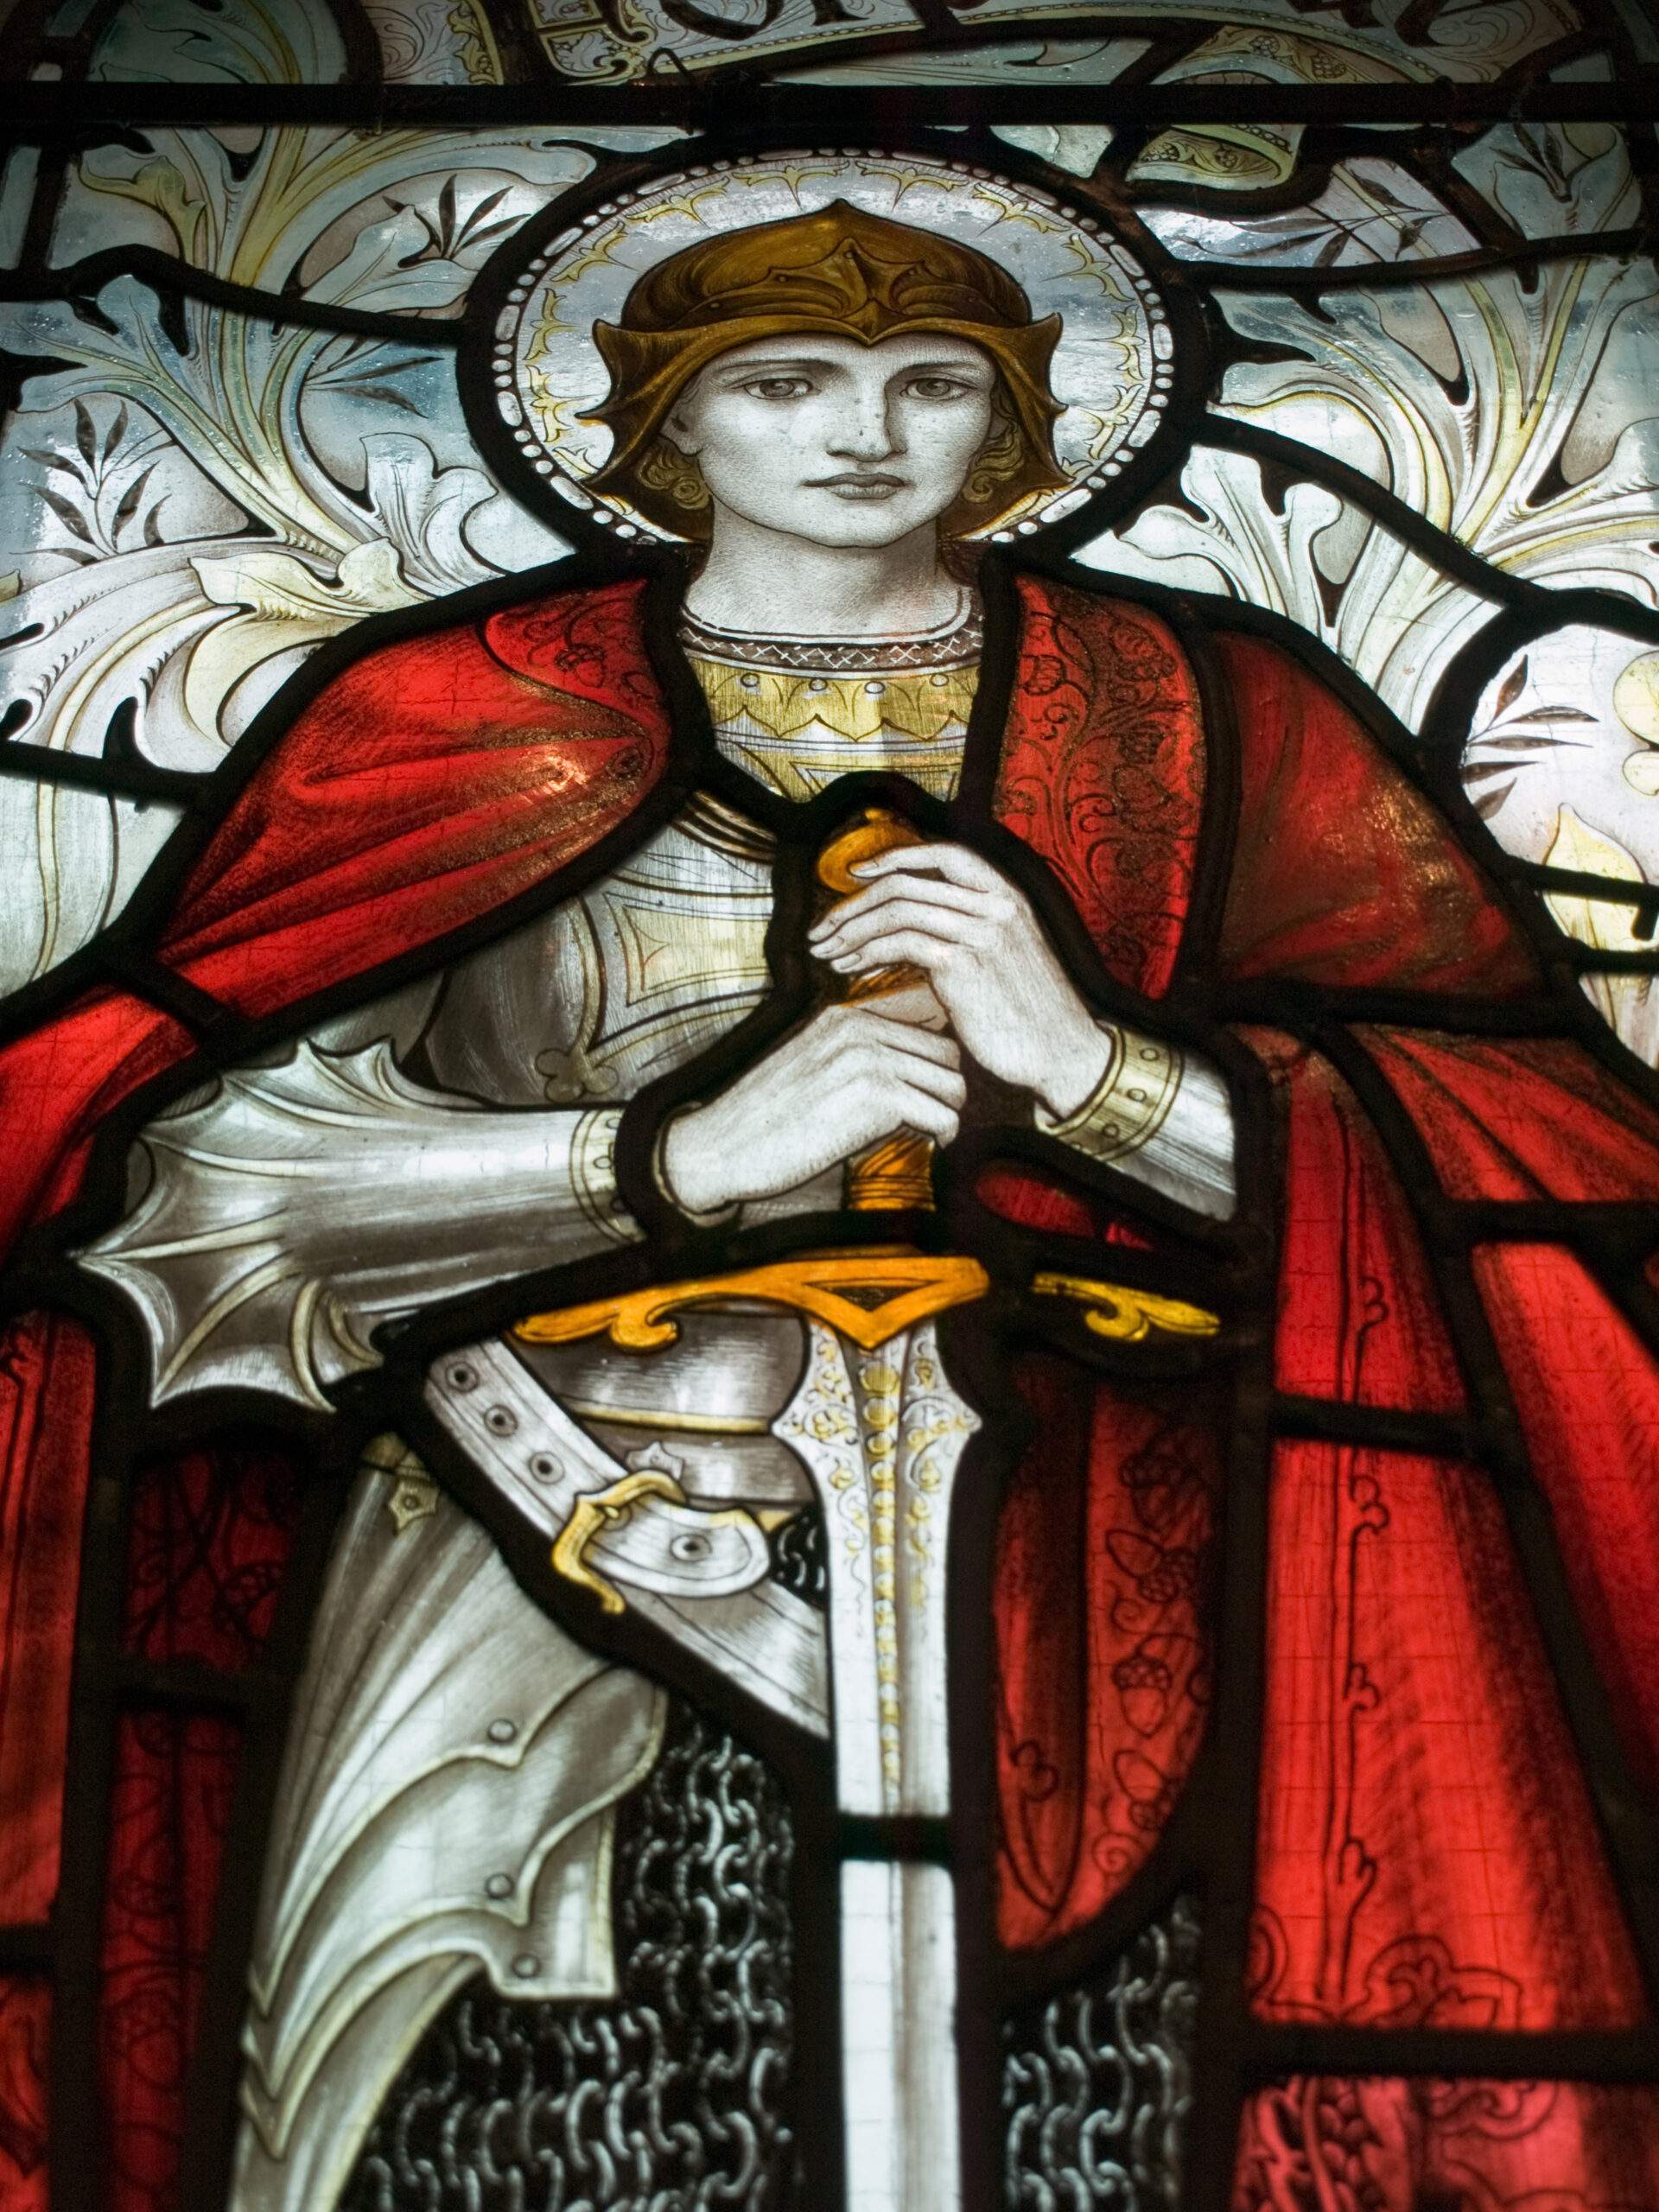 Stained glass window of St. Joan of Arc